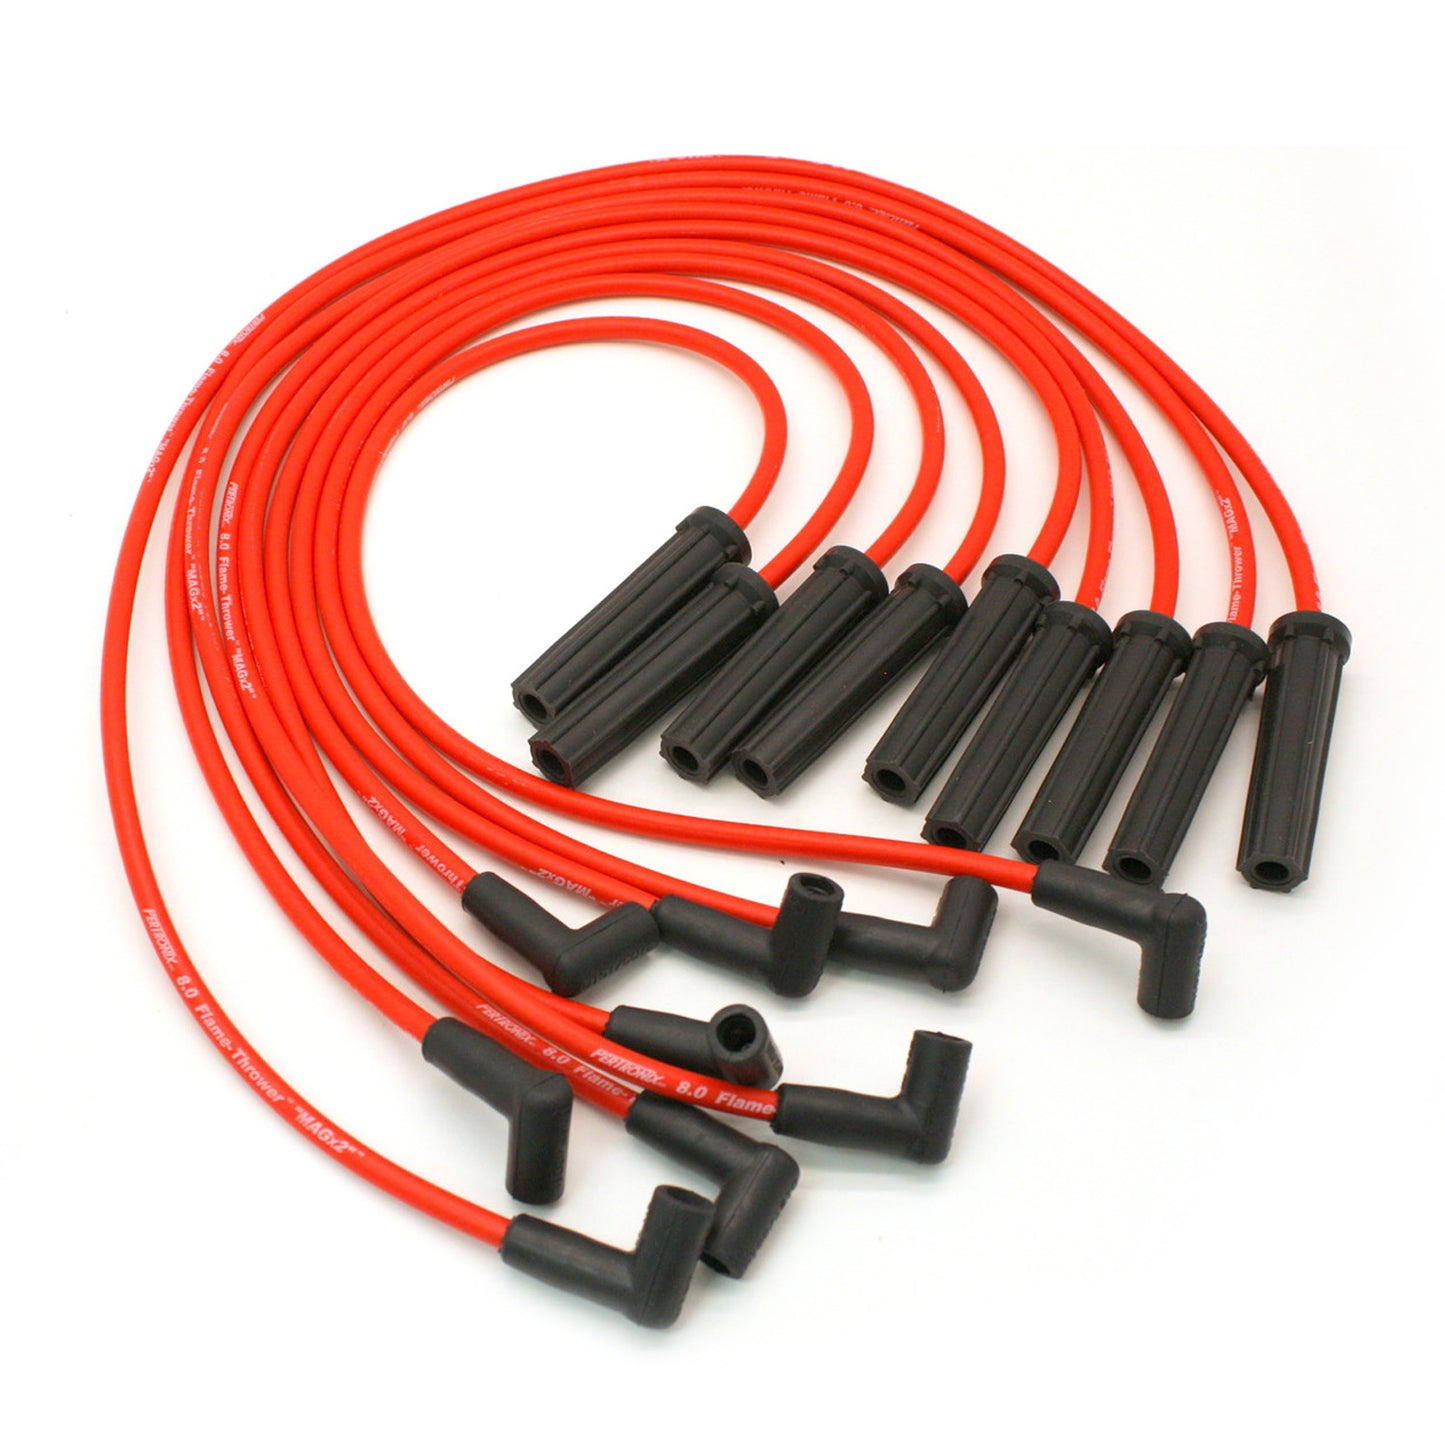 PerTronix 808418 Flame-Thrower Spark Plug Wires 8 cyl 8mm GM HEI Custom Fit Red